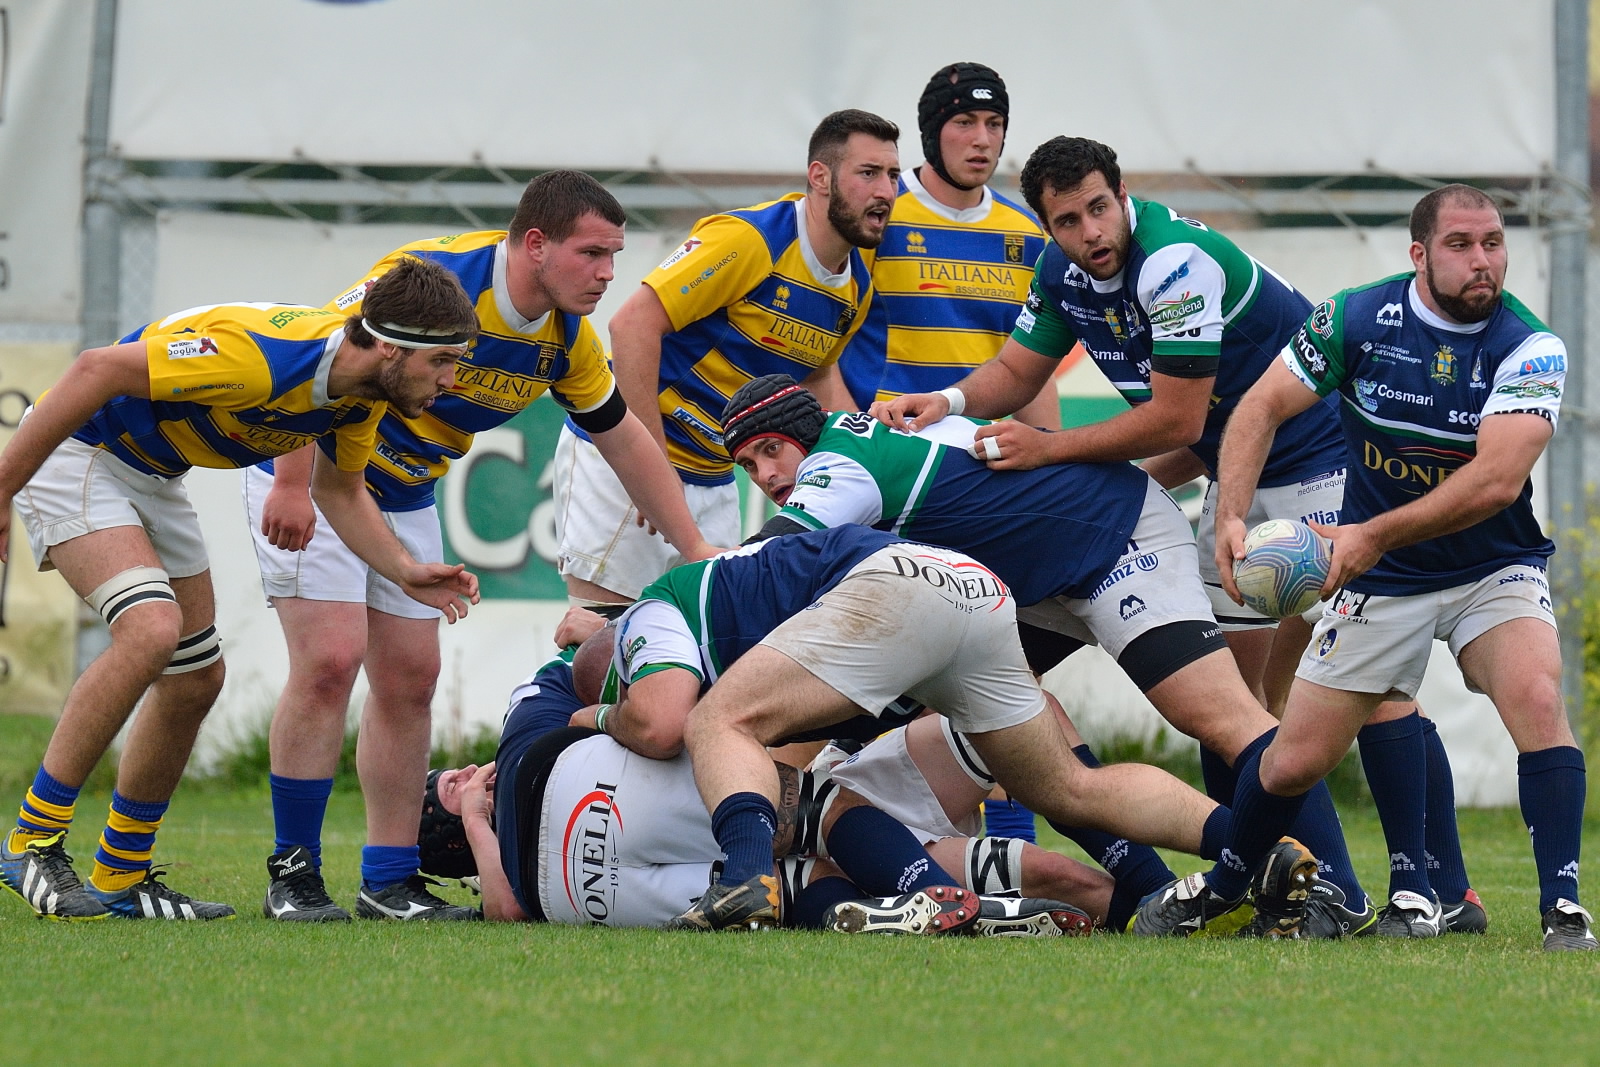 rugby parma 2014 481203640